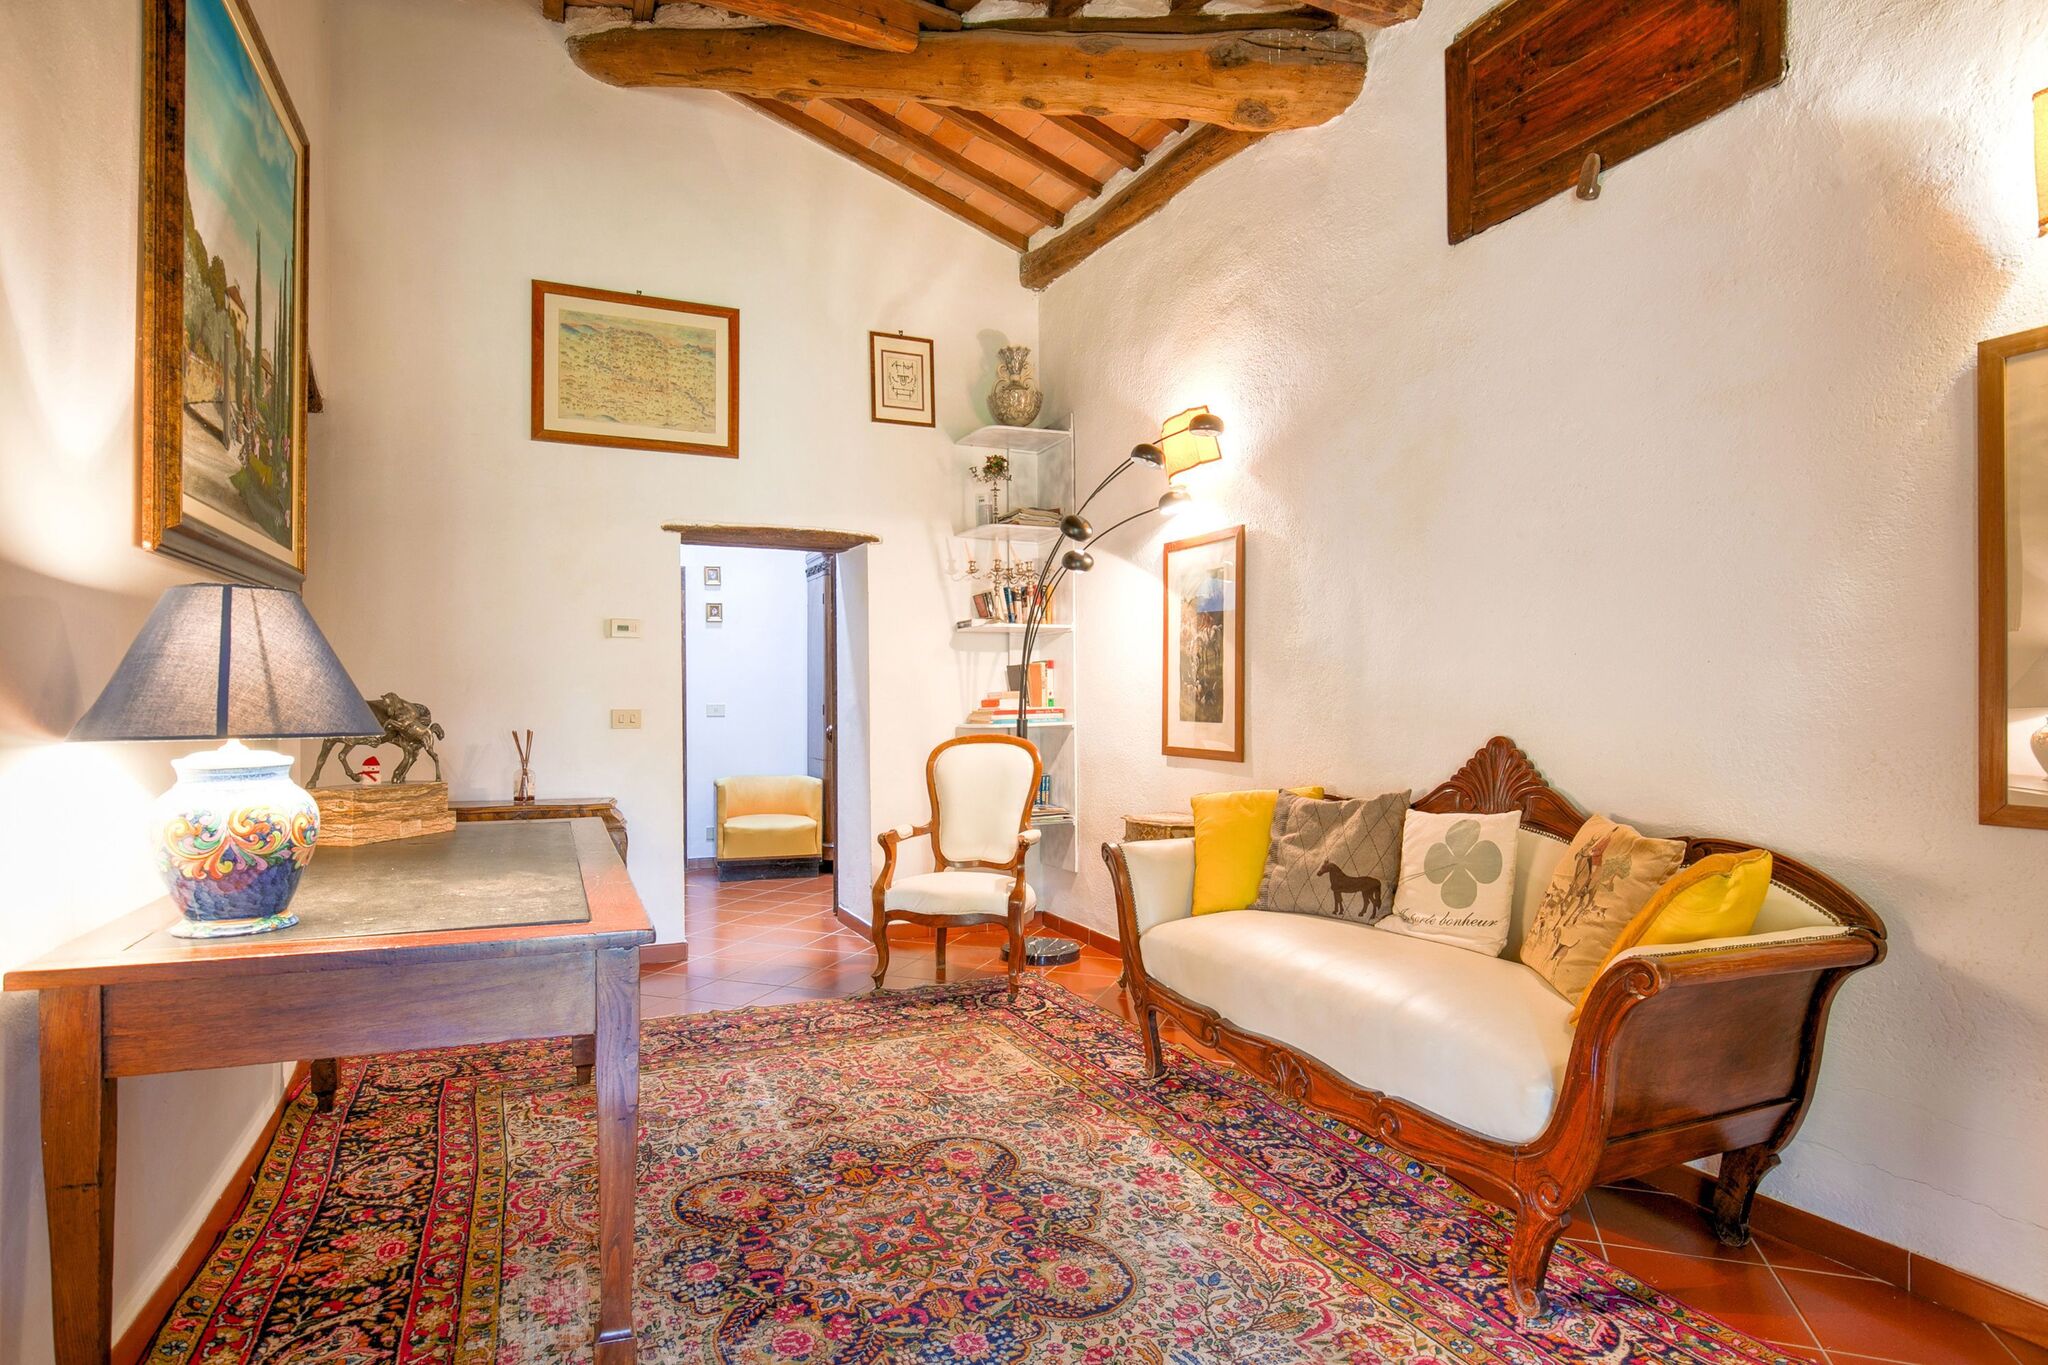 A beautiful, traditional Tuscan hamlet in the hills.